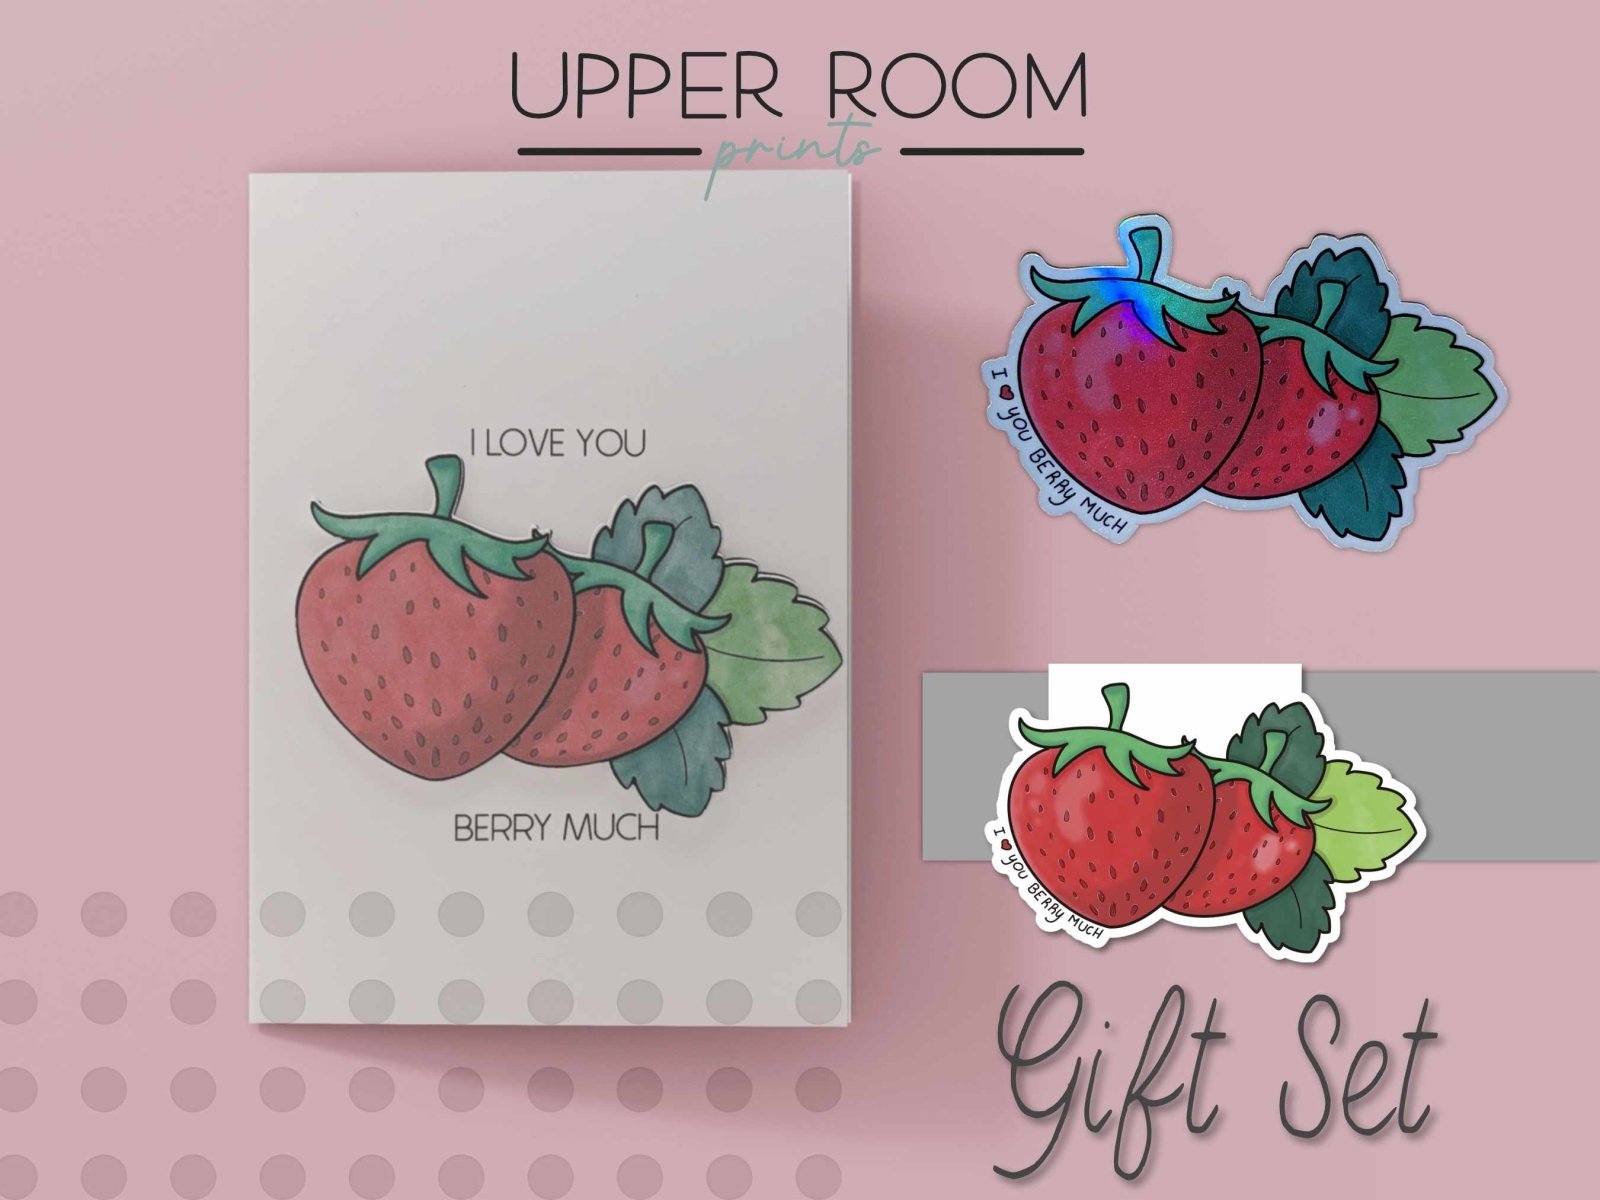 I Love You Berry Much - Greeting Card Gift Set - Greeting Cards - UpperRoomPrints